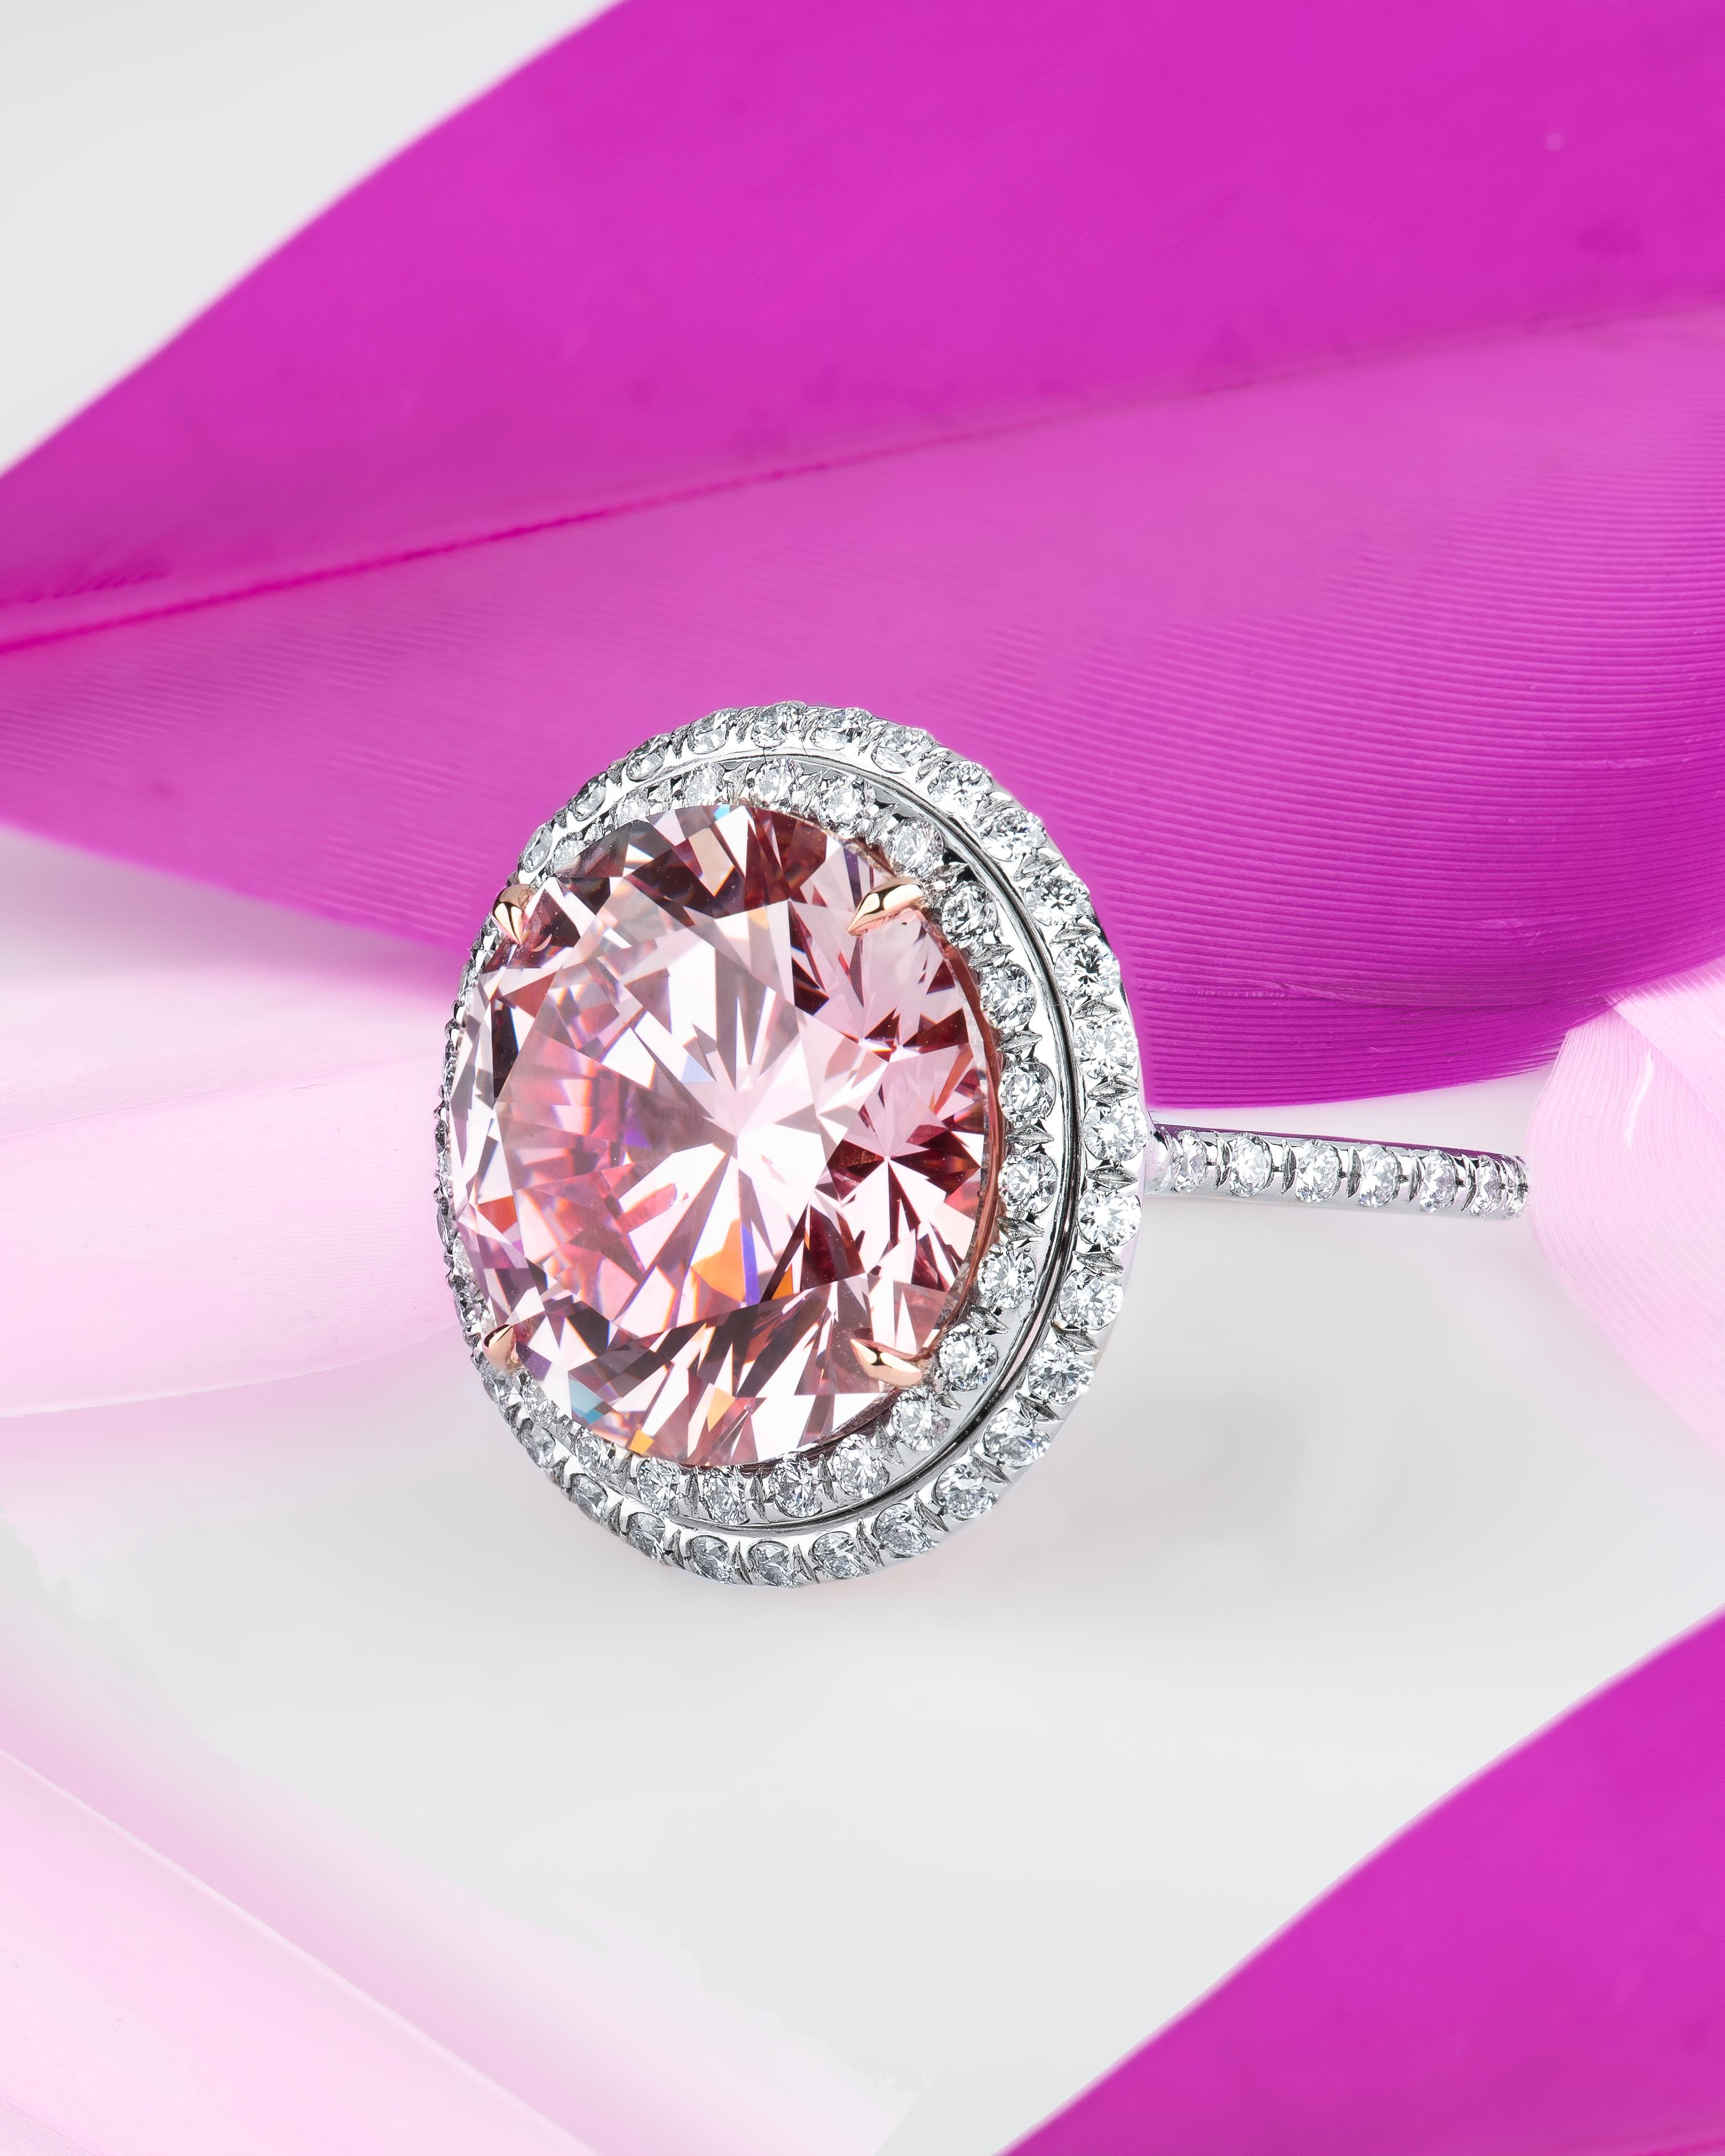 Beautiful 14.00 carat round brilliant cut pink diamond set in a custom platinum ring with approximately 2.15ctw in fine white diamonds with a custom rose gold gallery. The center diamond is of natural origin and has been treated through the process